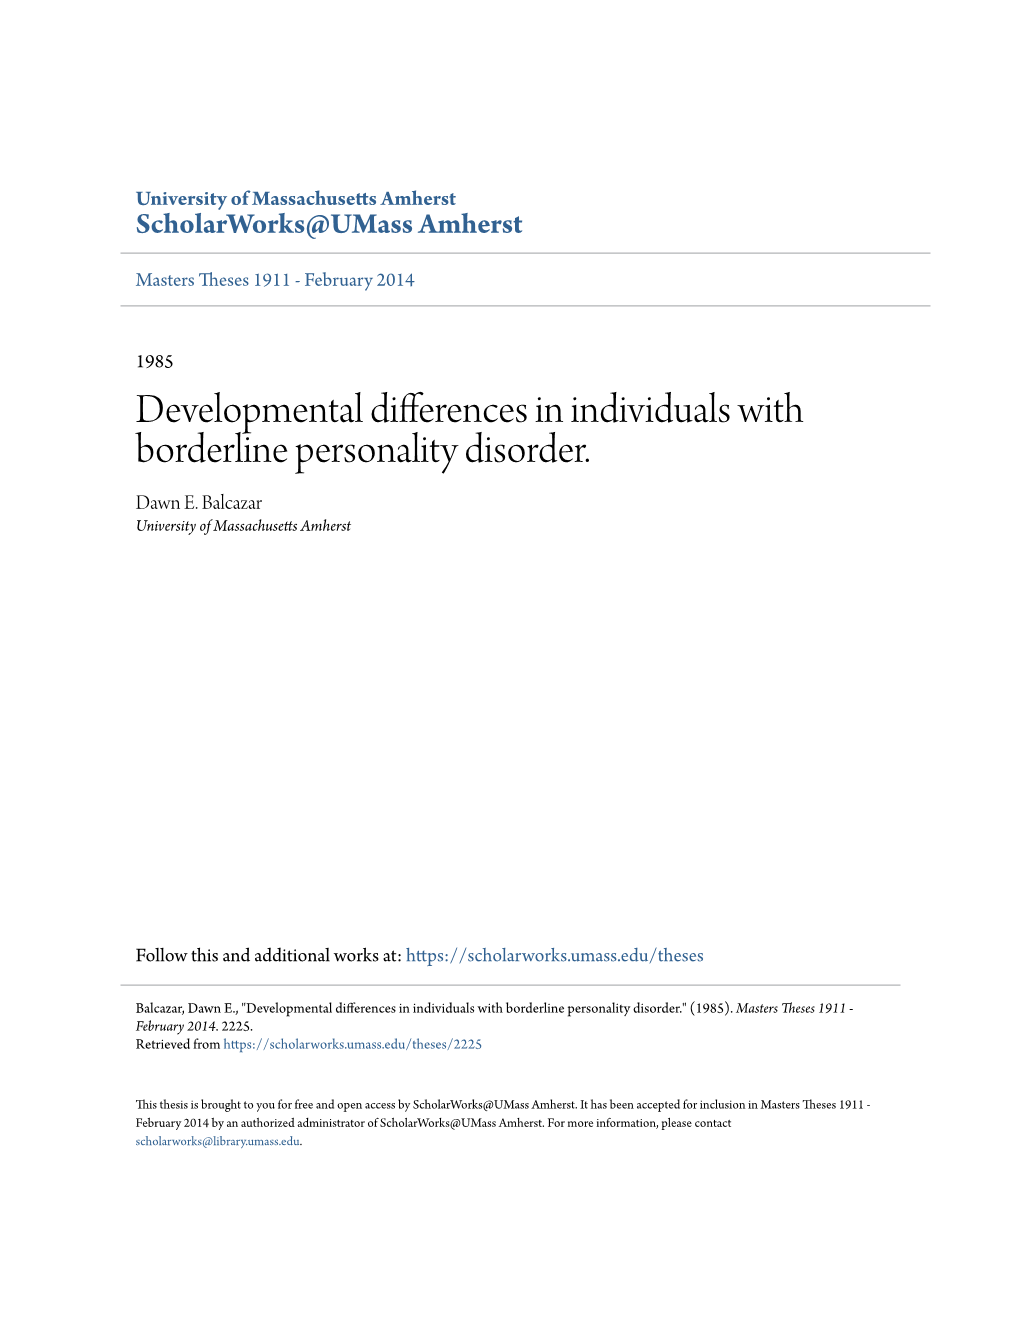 Developmental Differences in Individuals with Borderline Personality Disorder